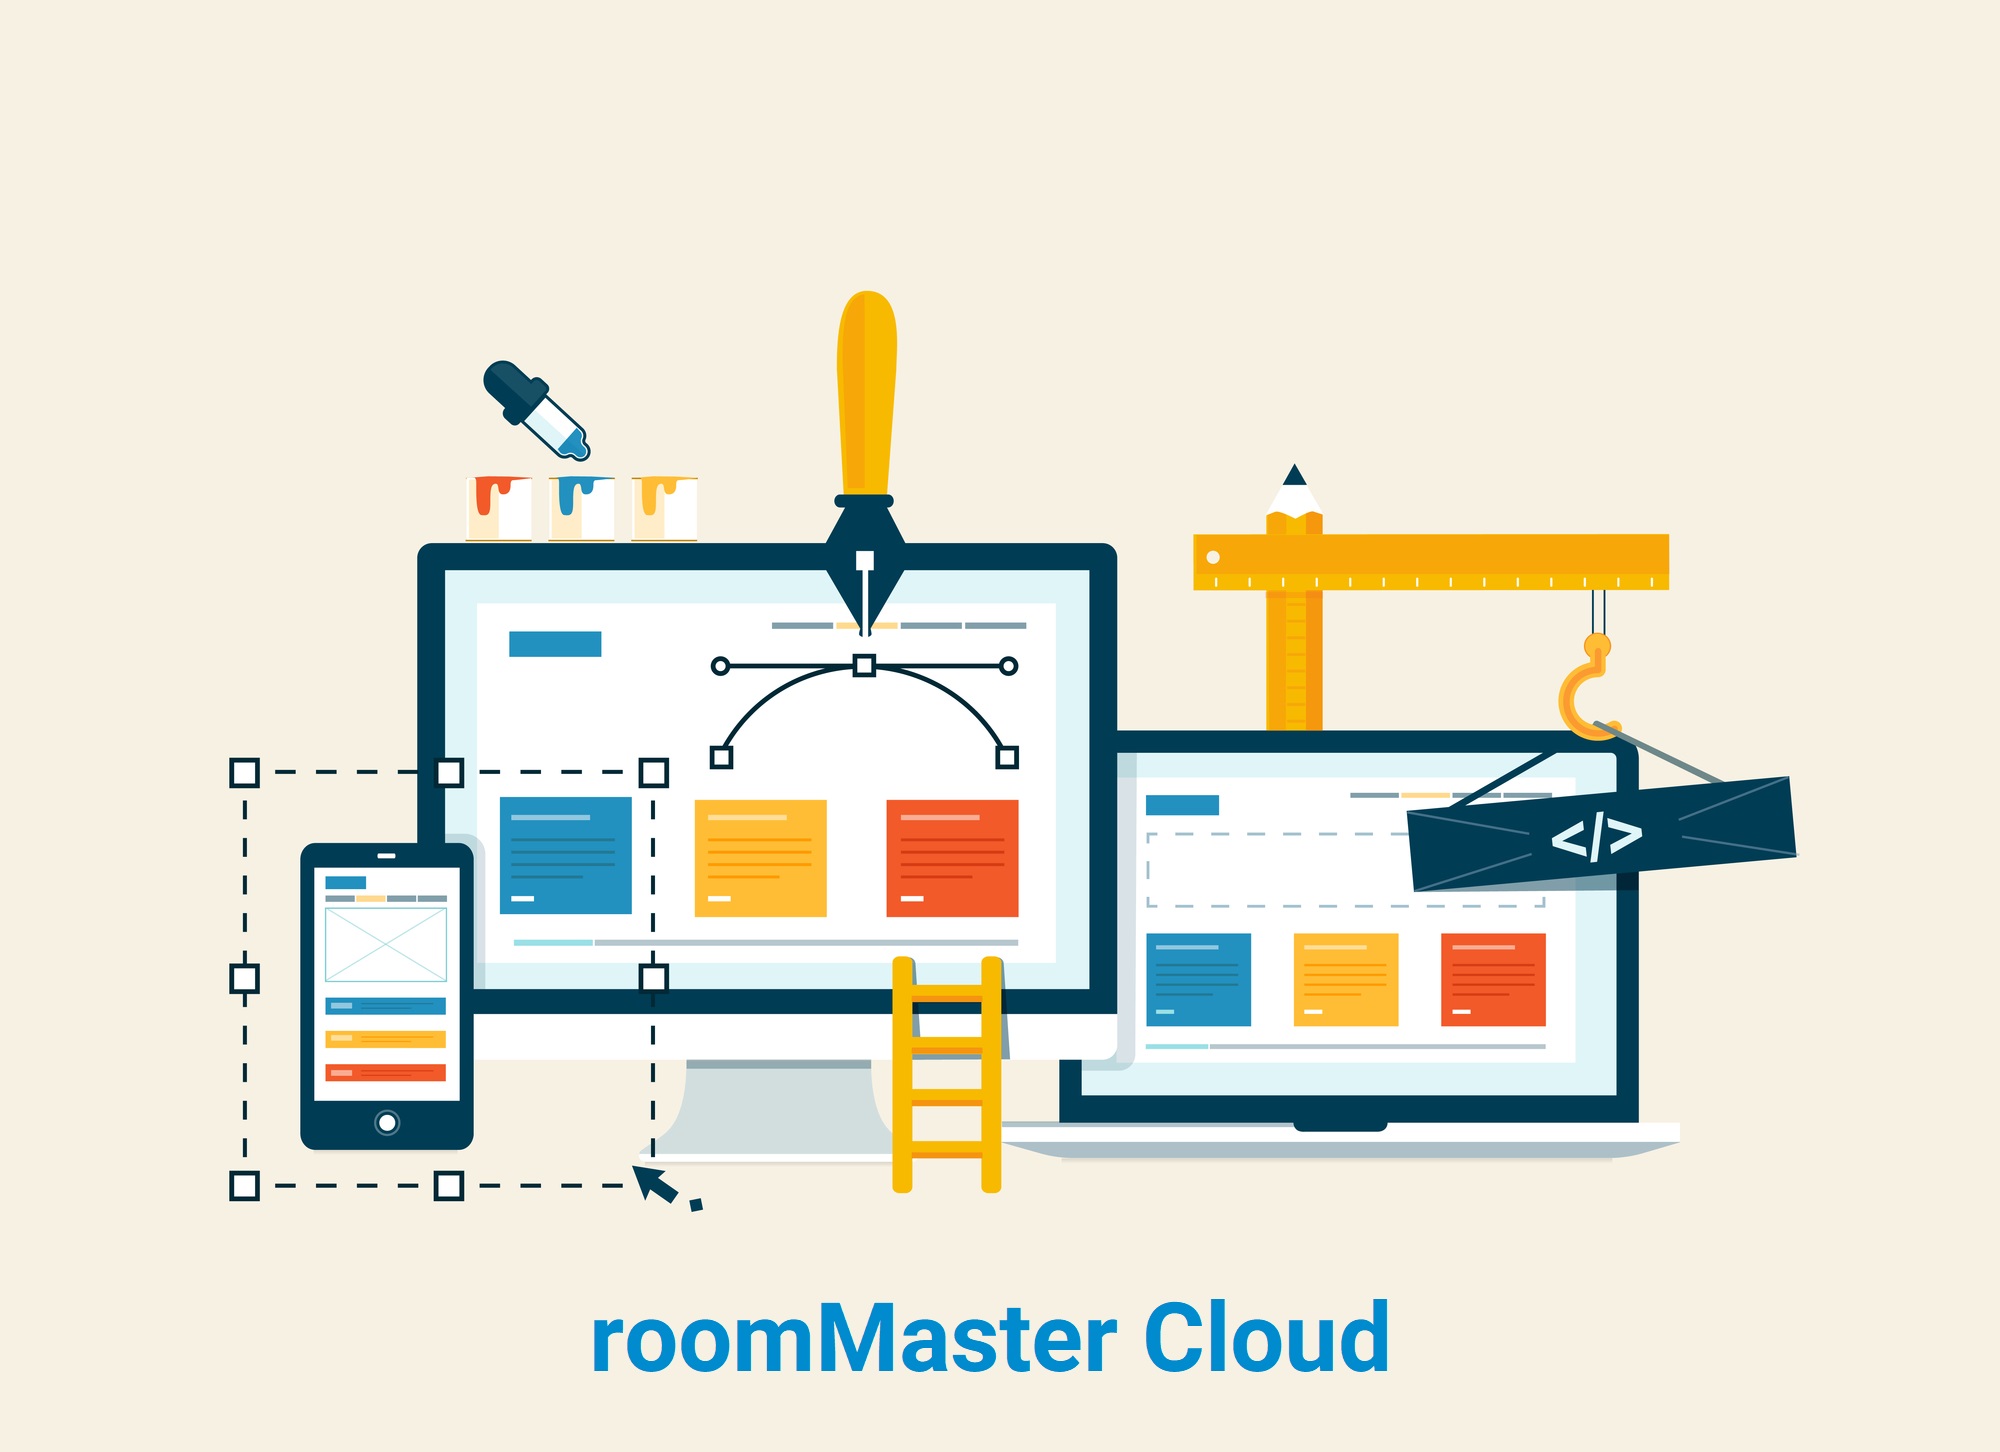 InnQuest advances roomMaster cloud functionality